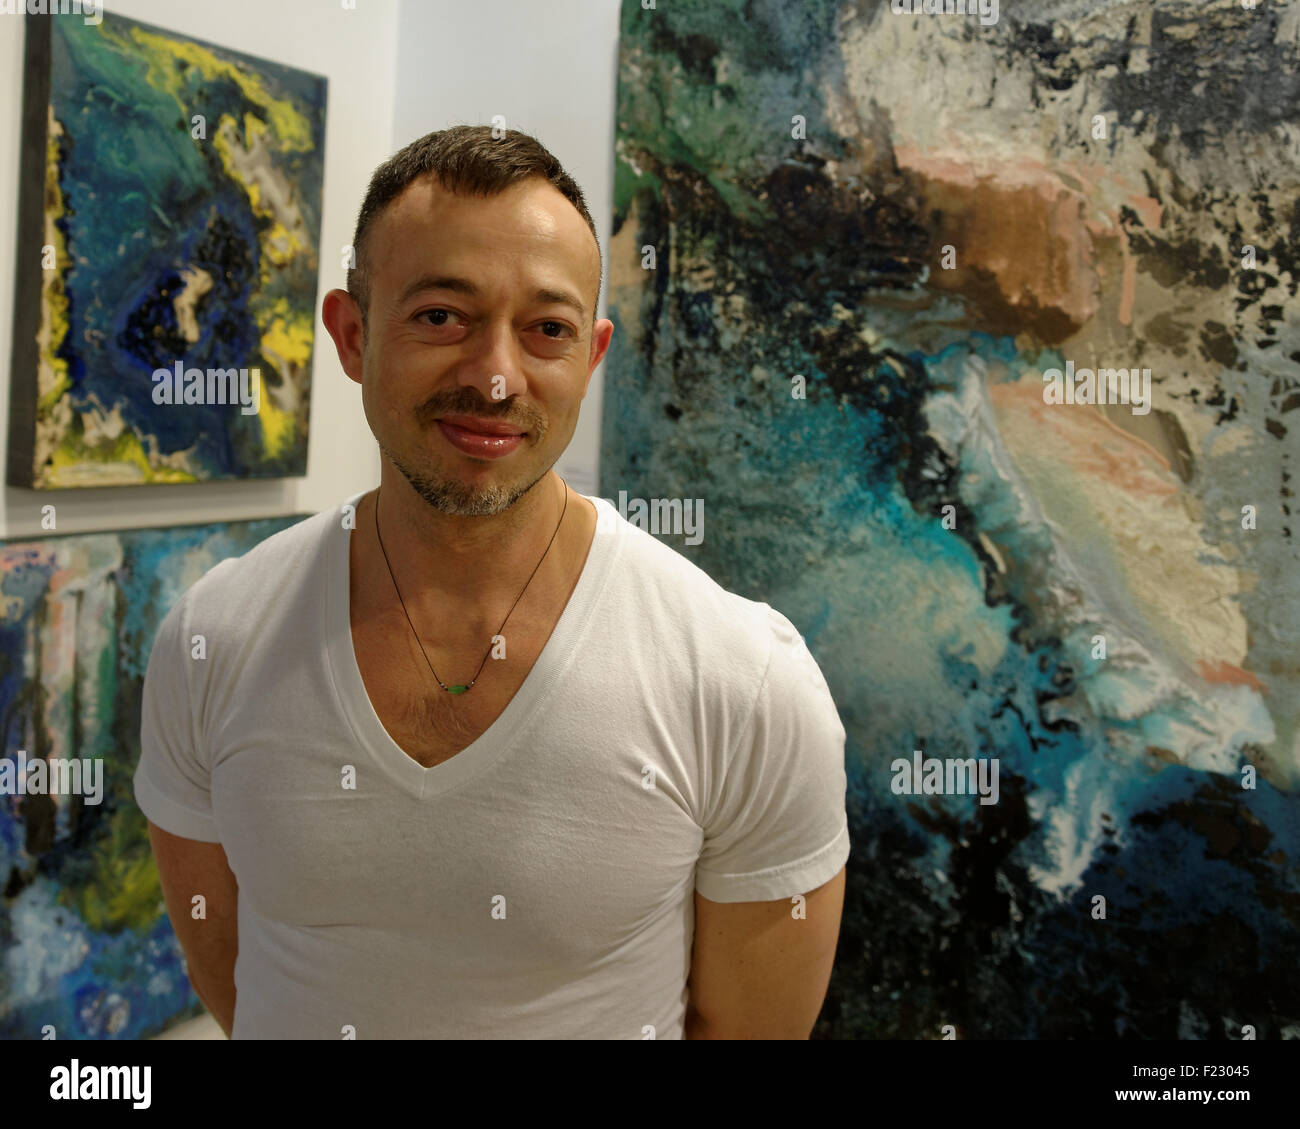 Sydney, Australia. 10th September, 2015.  Eduardo Santos is one of the artists exhibiting his works at the first artist-led 'The Other Art Fair' at Central Park in Sydney. Stock Photo